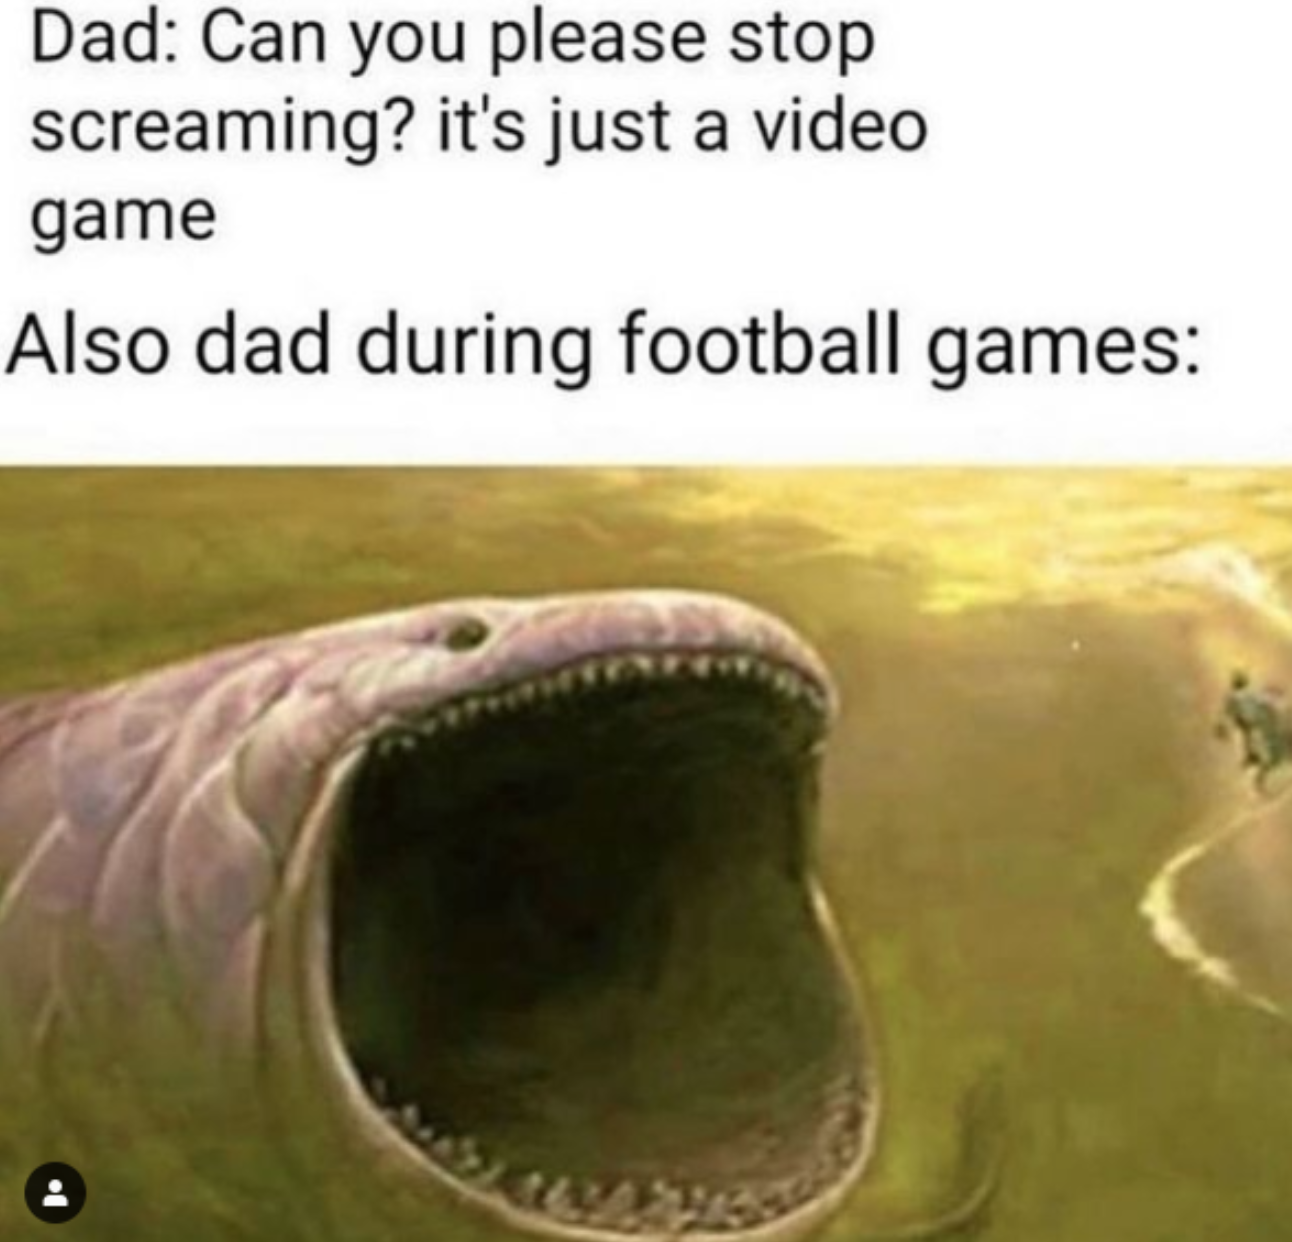 stop screaming it's just a video game - Dad Can you please stop screaming? it's just a video game Also dad during football games